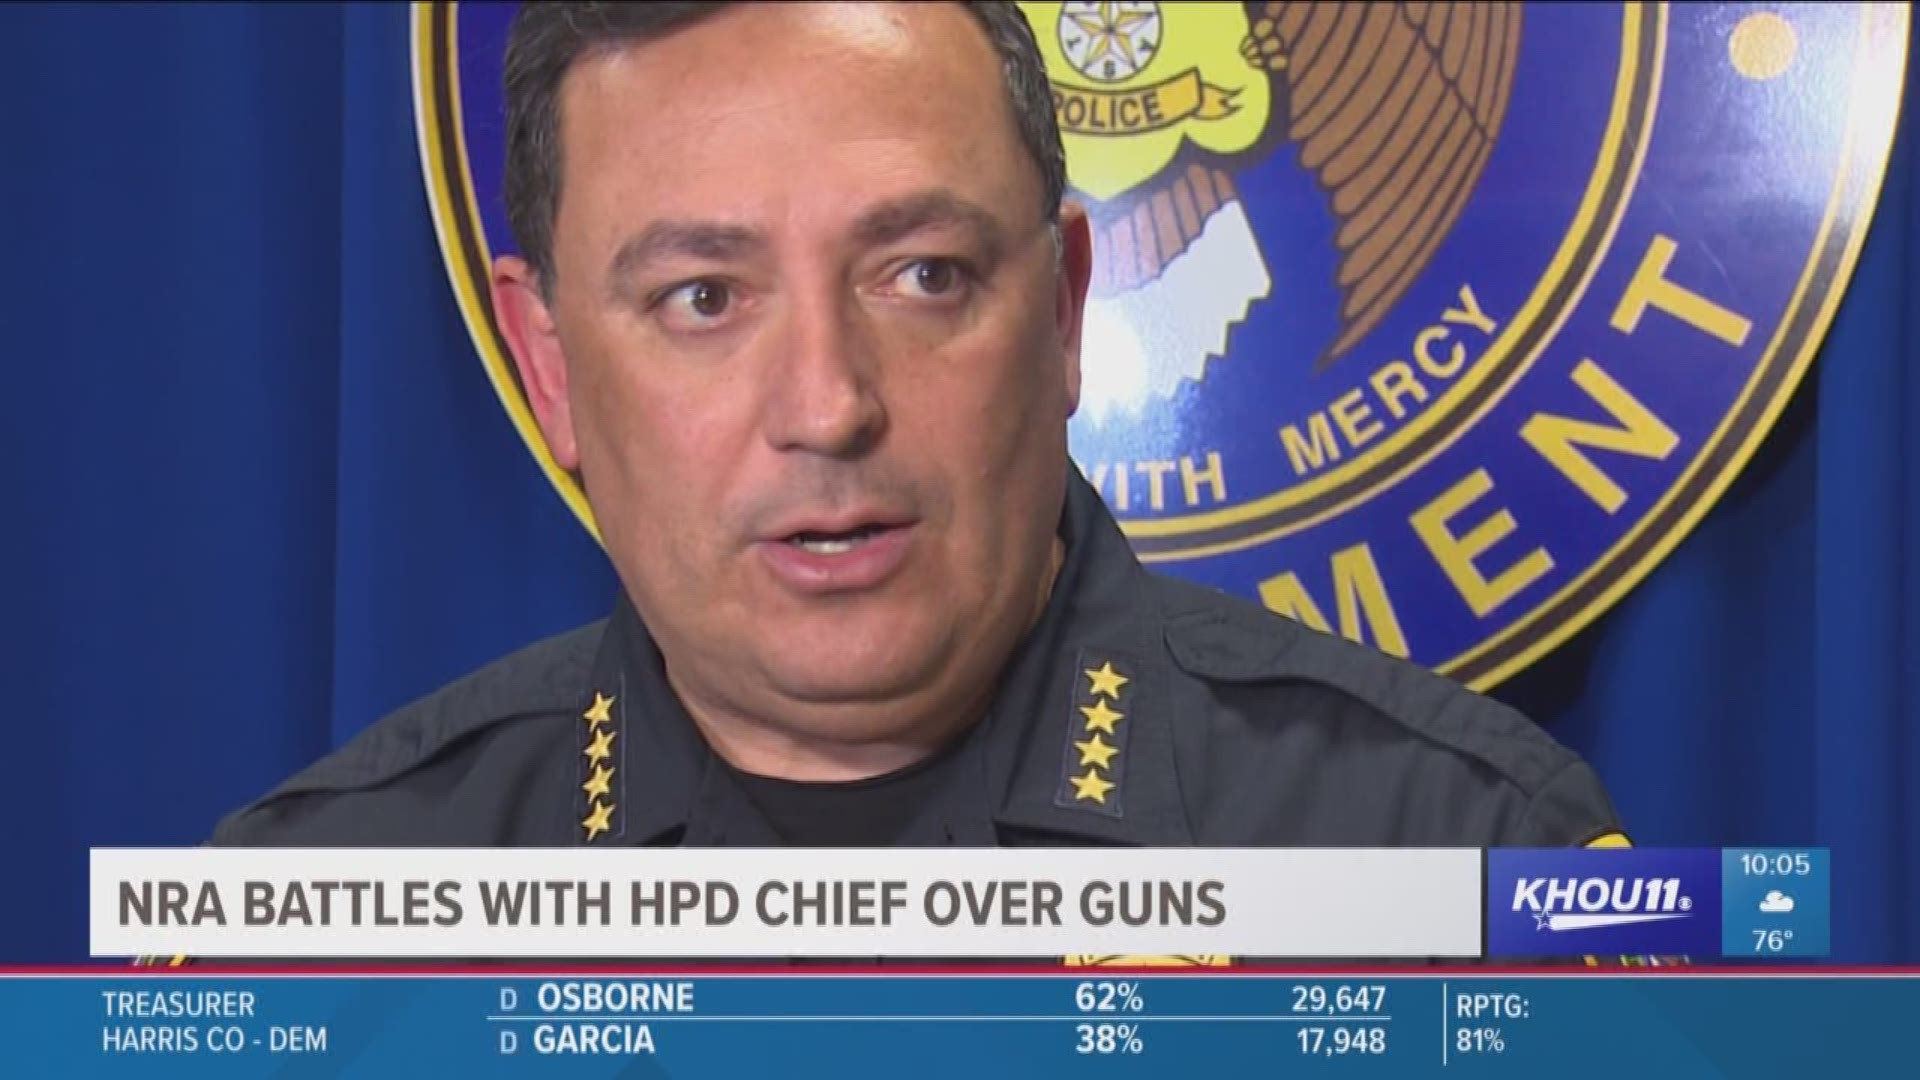 The NRA battled with Houston police Chief Art Acevedo over guns via Twitter this week.